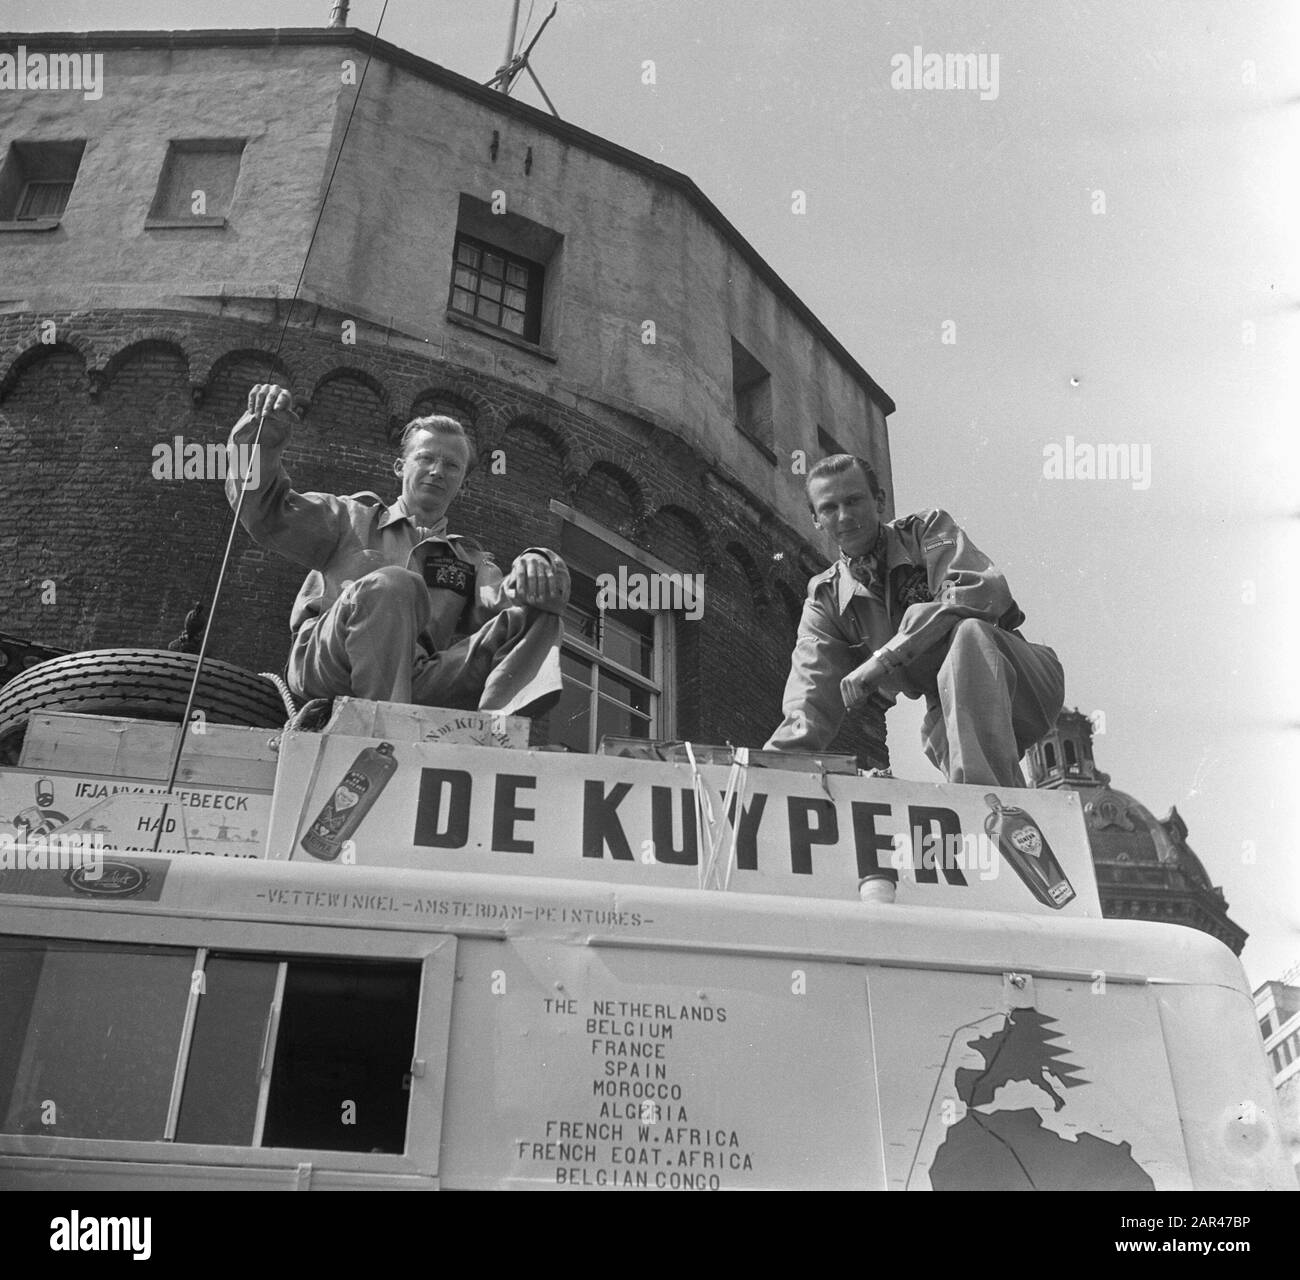 Departure Cape Town Expedition from Amsterdam. Dromedaris II with the trader Karei Kramer (25) behind the wheel and car technician Jan Helms (28), head through the roof of the jungle truck, on the lookout, started exactly a quarter past eleven from the Prince Hendrikkade for their adventurous and commercial journey of 3 March to the Union of South - Africa. Annotation: In the footsteps of Van Riebeeck HOLLAND BOYS TO THE CAPE. The Telegraph. Amsterdam, 15-05-1952. Seen on Delpher on 12-05-2017, resolver.kb.en/ resolve?urn=ddd:110585505:mpeg21:a0120 Date: 14 May 1952 Keywords: expeditions Stock Photo